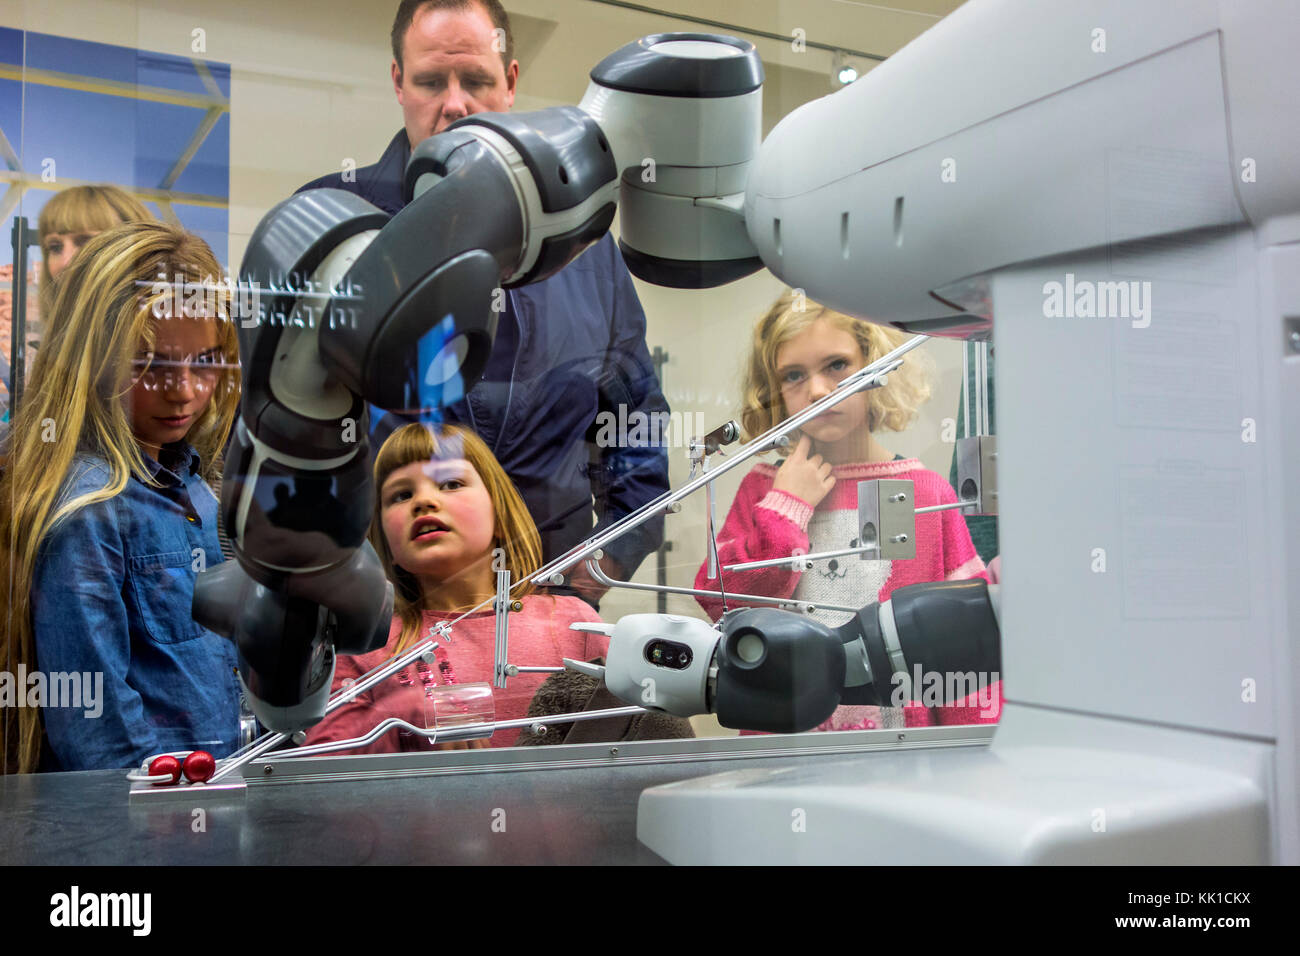 Curious children looking at demonstration with industrial robot arms at exposition about robotics and artificial intelligence / AI Stock Photo